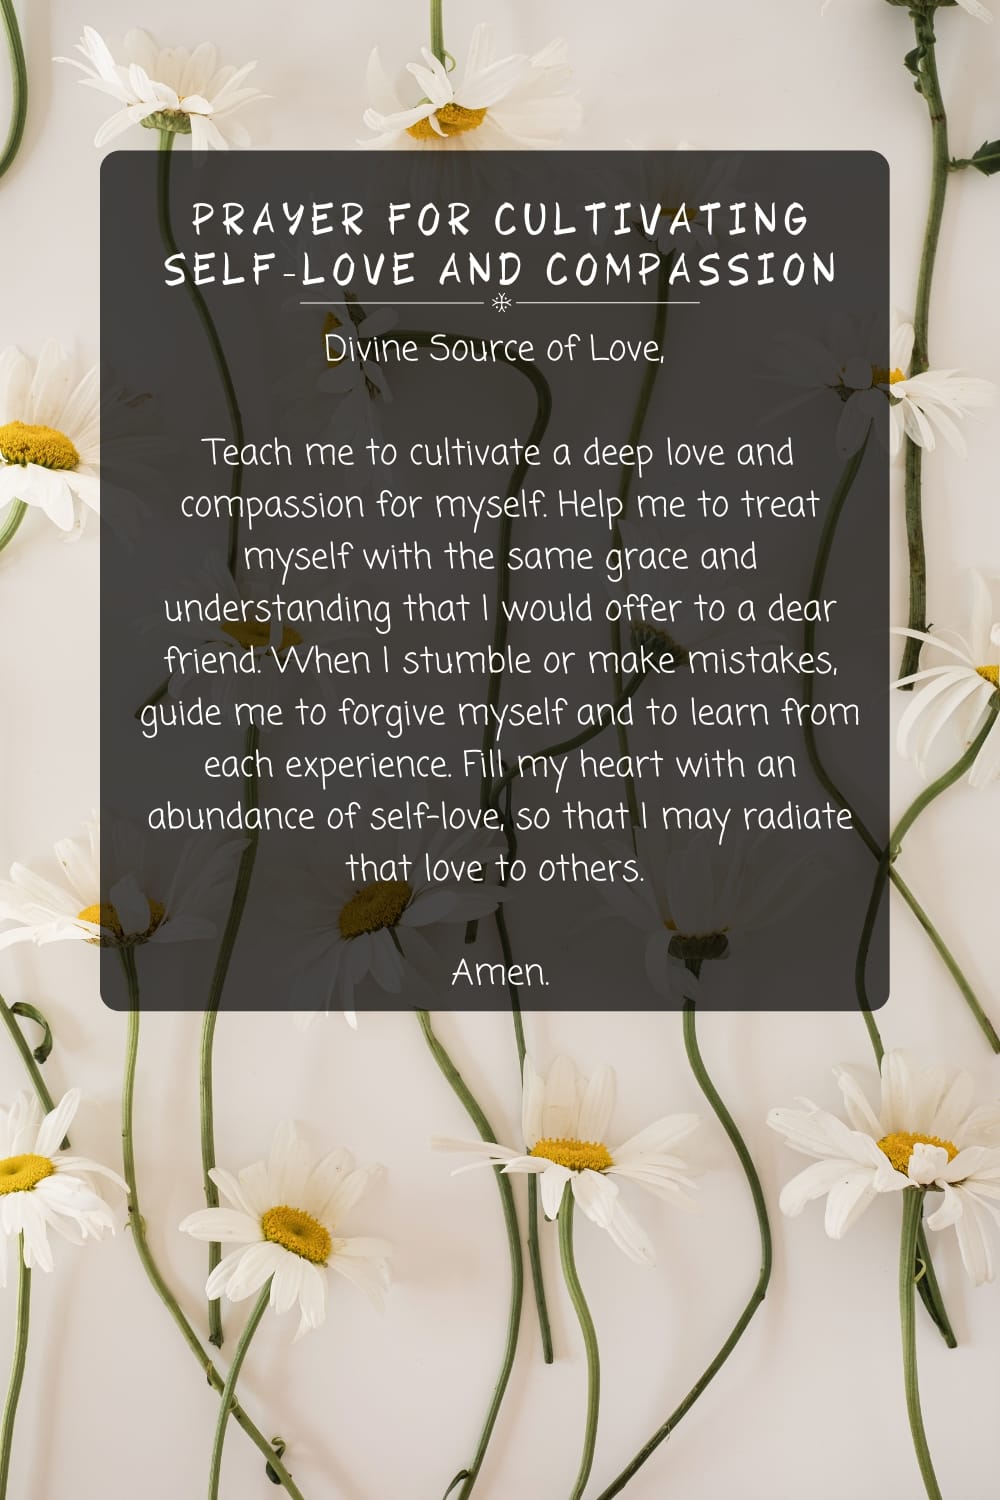 Prayer for Cultivating Self-Love and Compassion